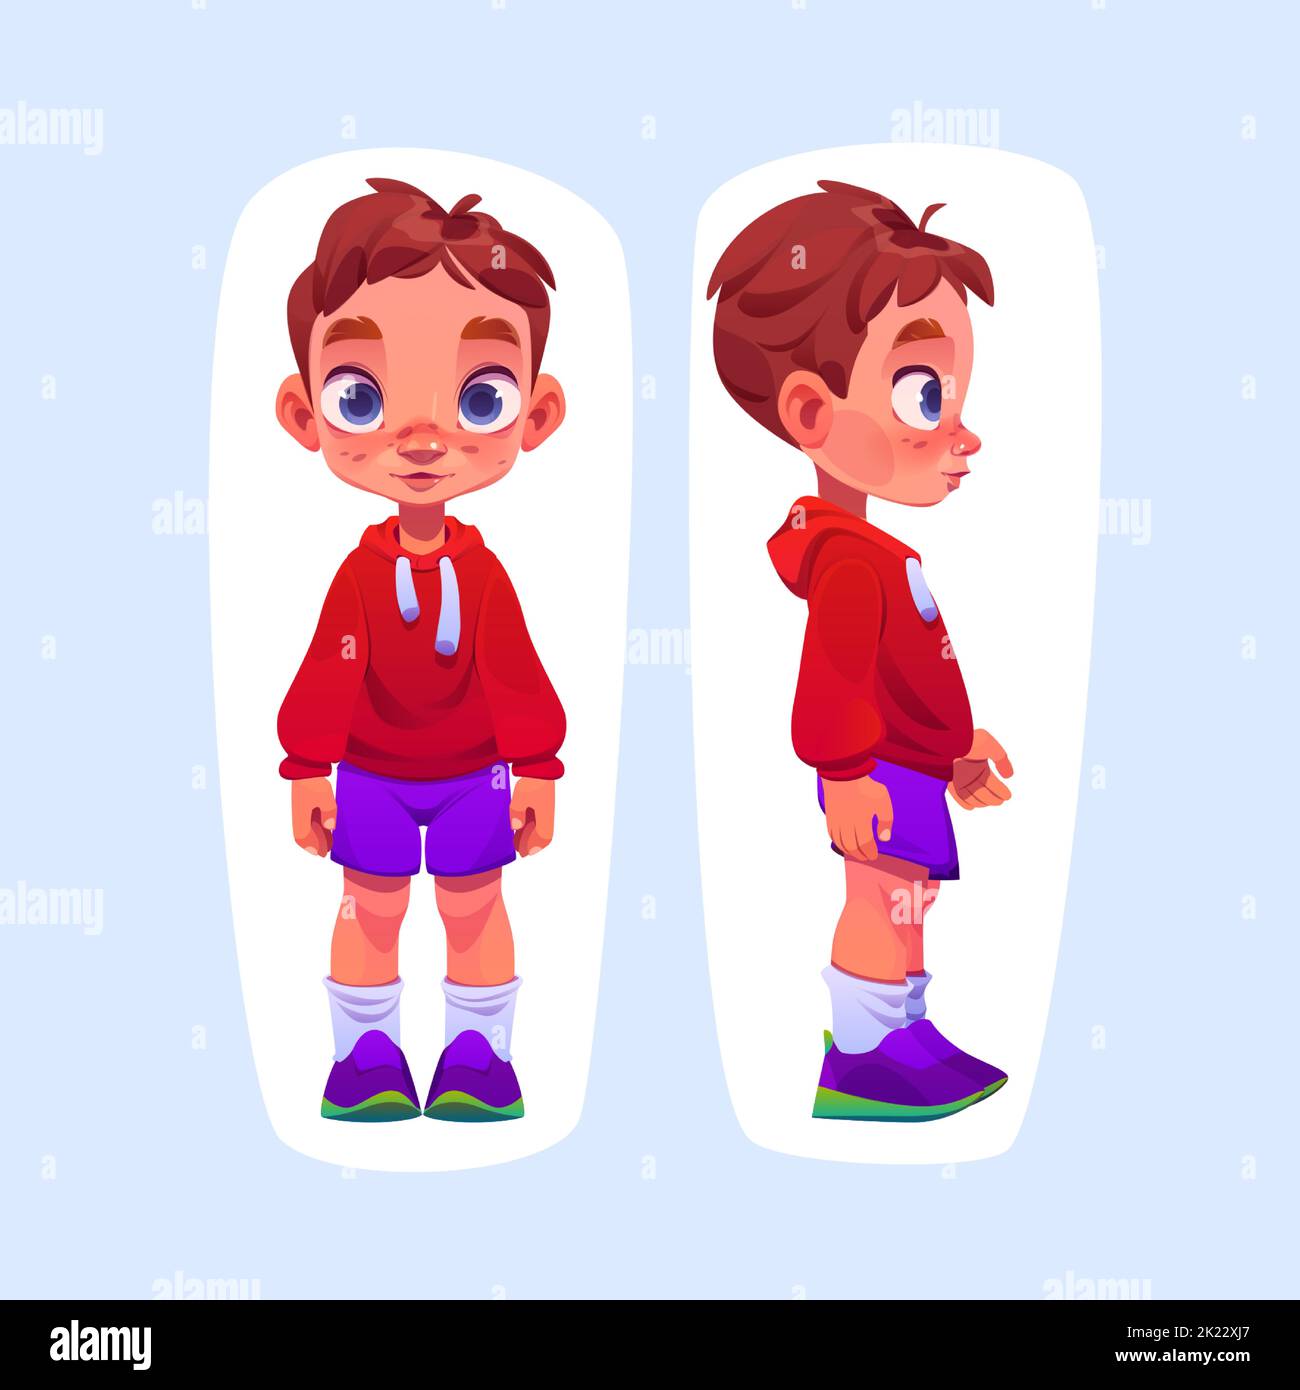 Little boy cartoon character front and side view. Cute toddler wear red hoodie, purple shorts, white socks and shoes. Funny child with ginger hair, blue eyes and freckles on face Vector illustration Stock Vector